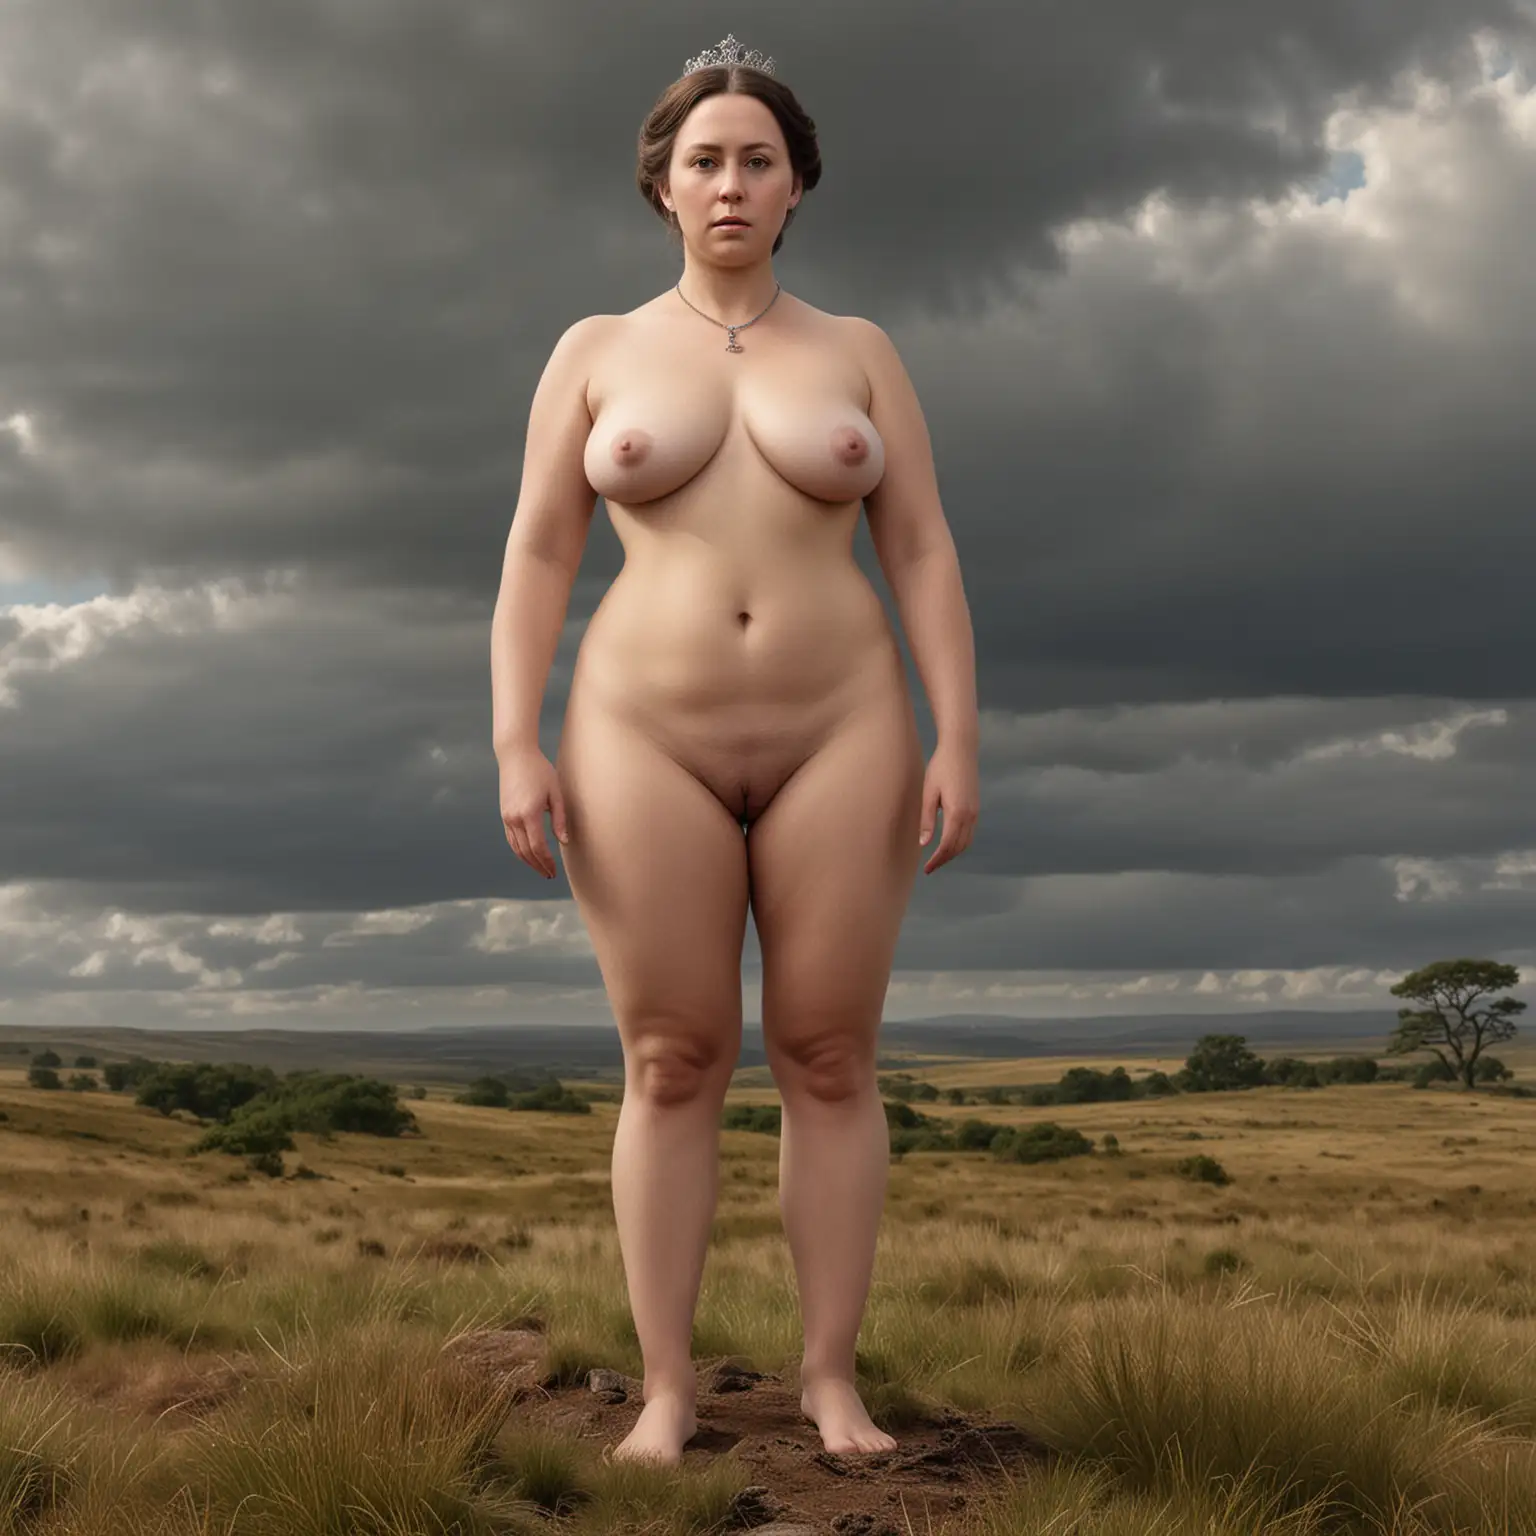 Queen Victoria of England. Standing completely Naked on a moor. Casual full frontal nude. photo-realistic. 